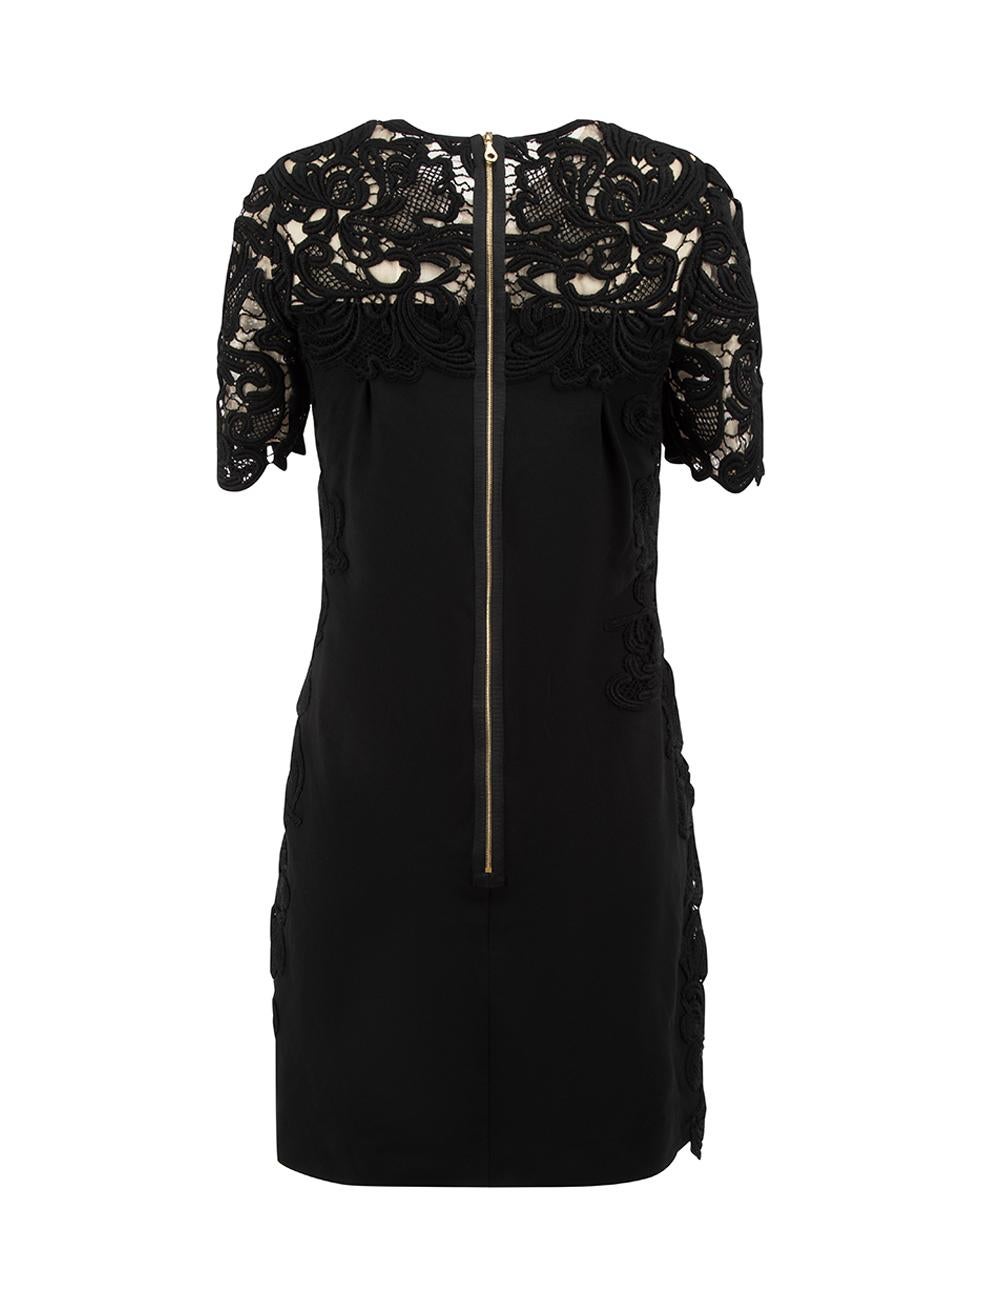 Erdem Black Guipure Lace Knee Length Dress Size S In Good Condition For Sale In London, GB